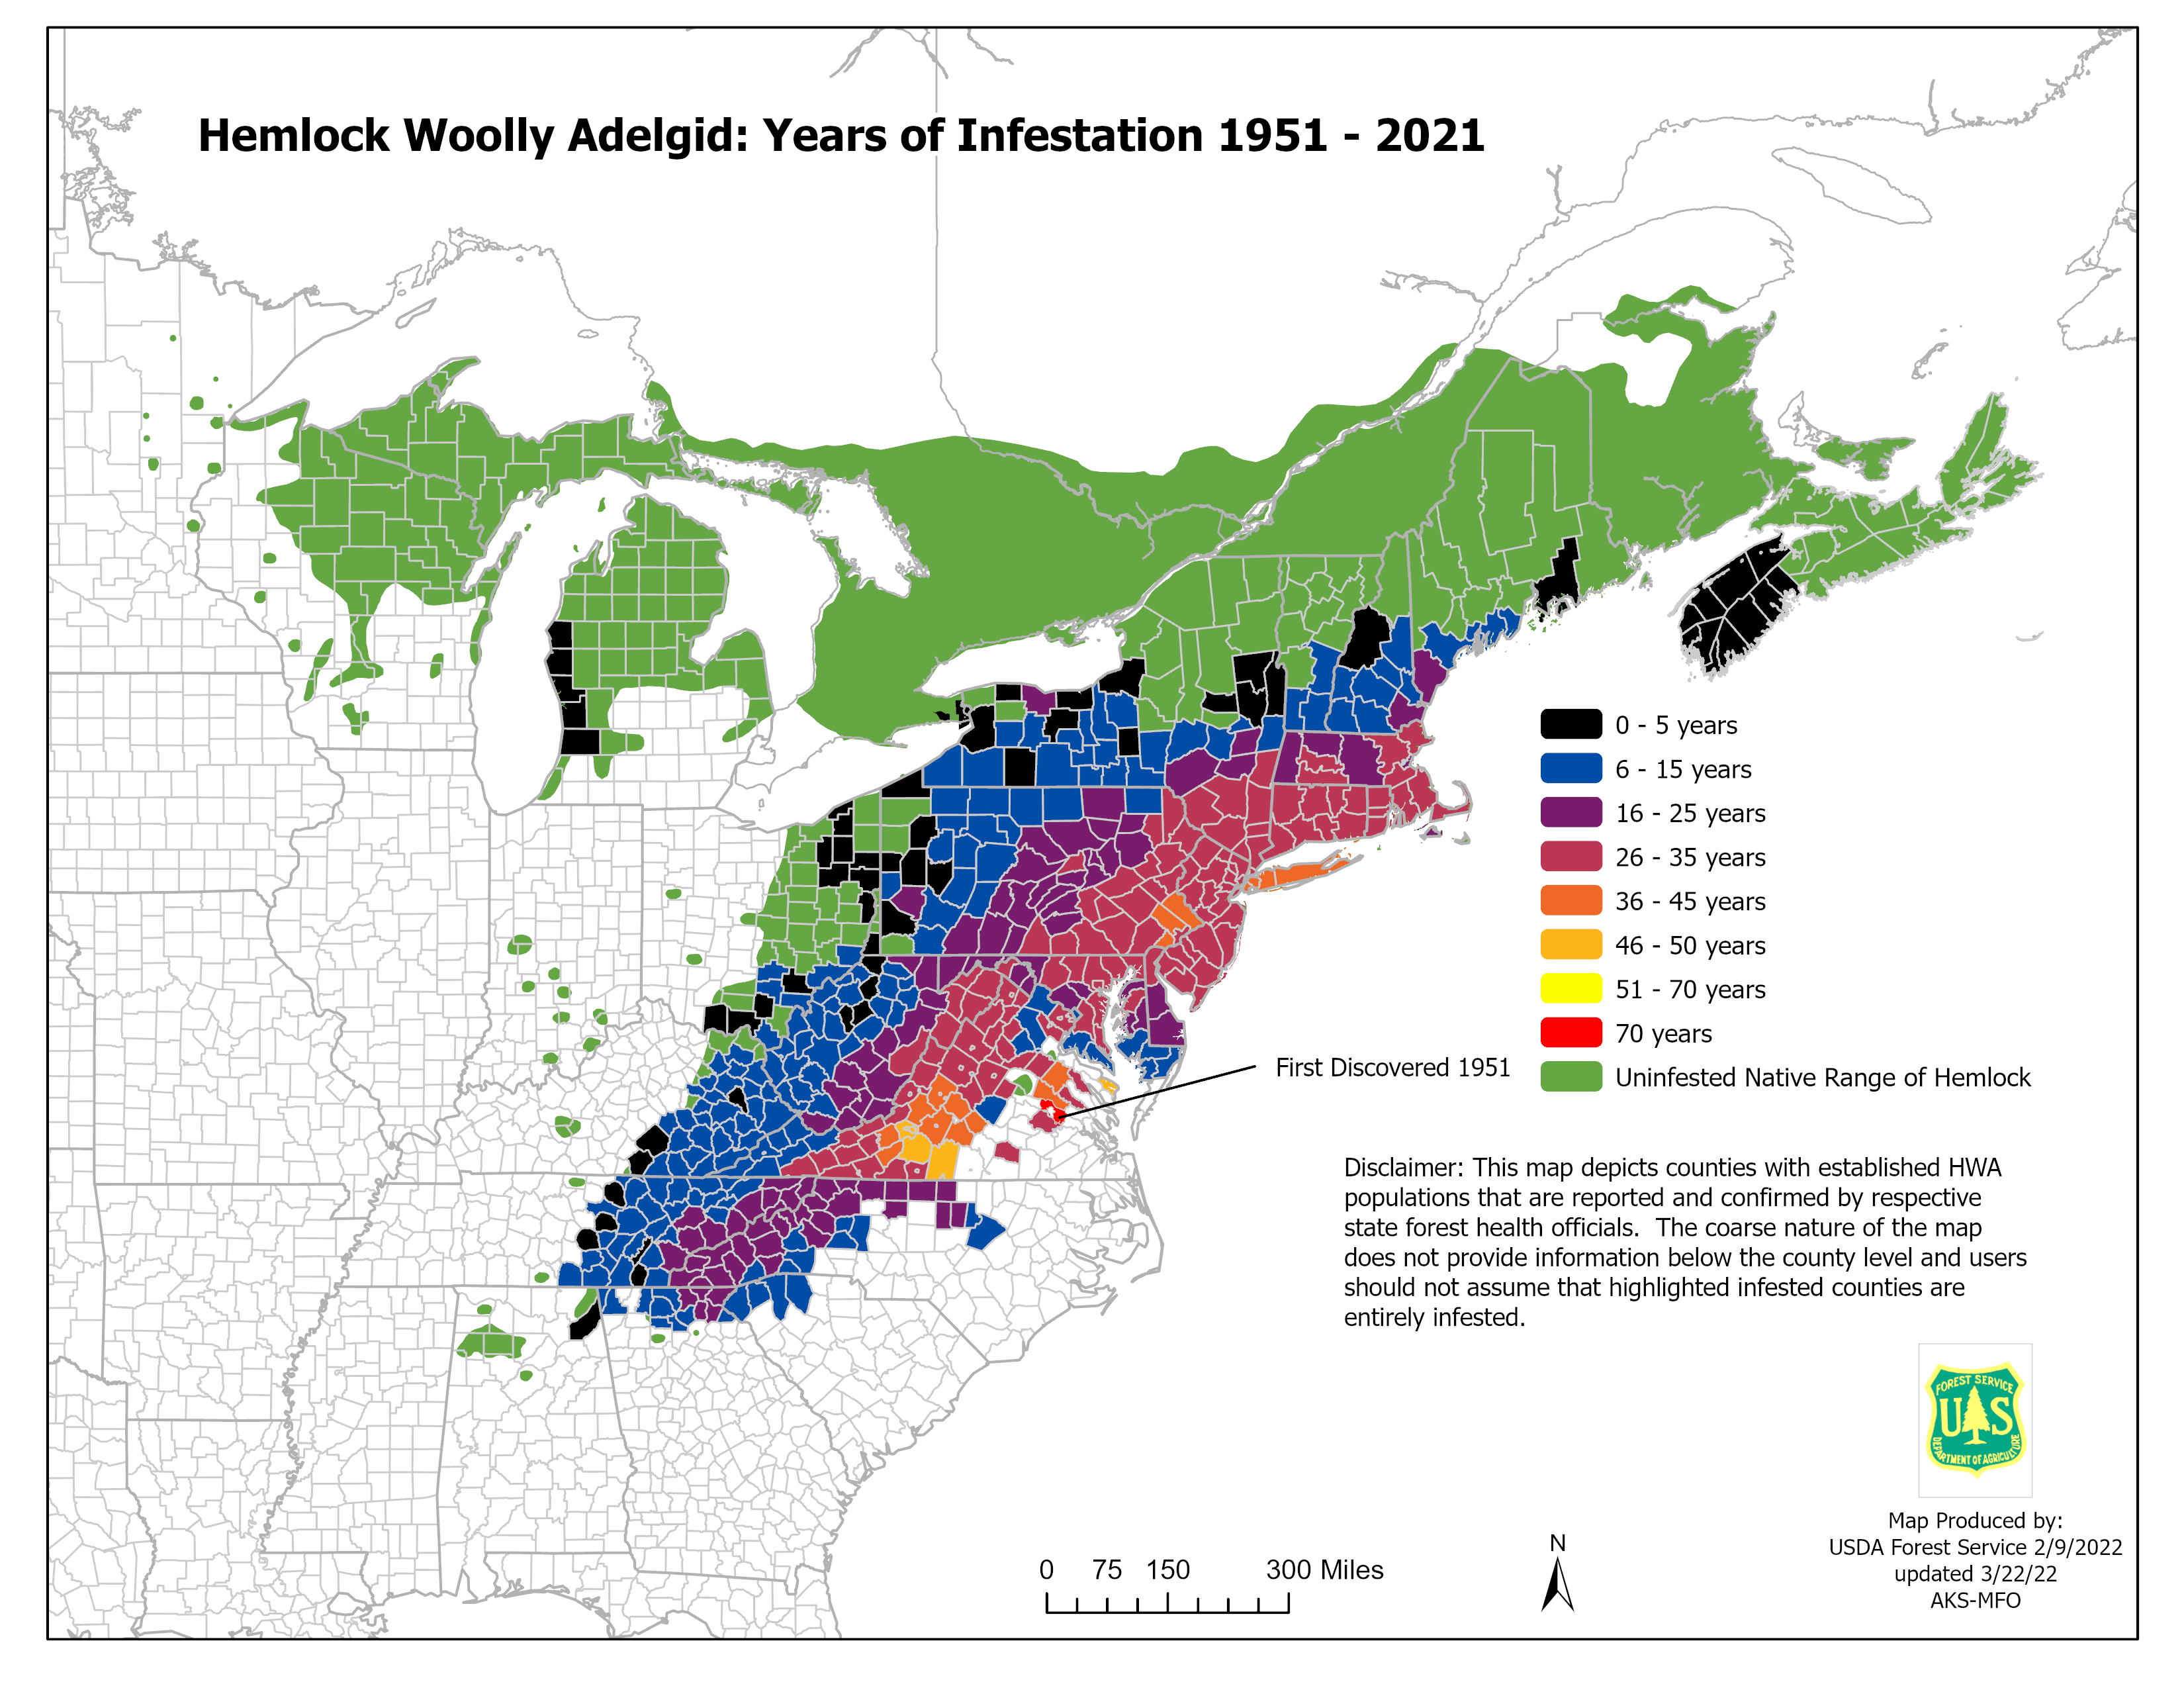 Map showing HWA infestations spreading across the Eastern US from 1951-2021